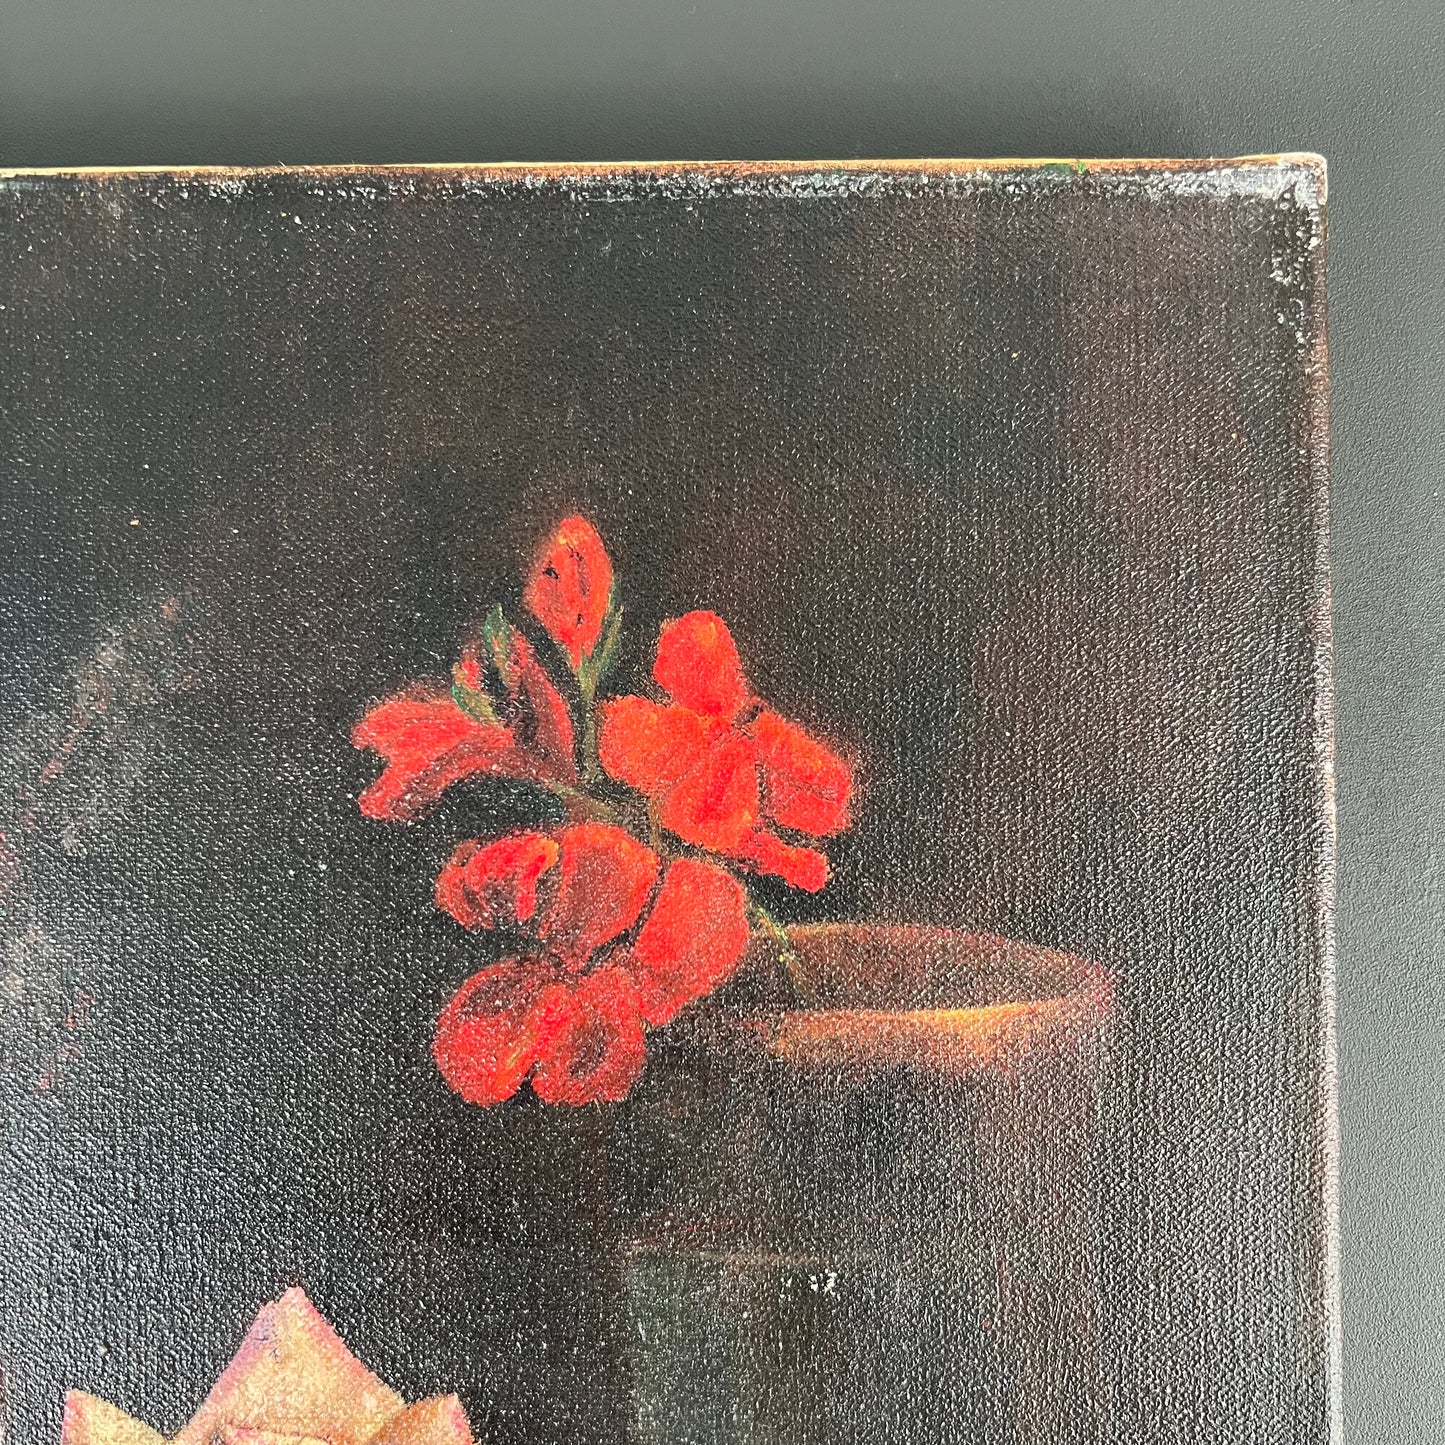 Vintage Oil Painting Still Life Moody Pink Roses & Red Geraniums